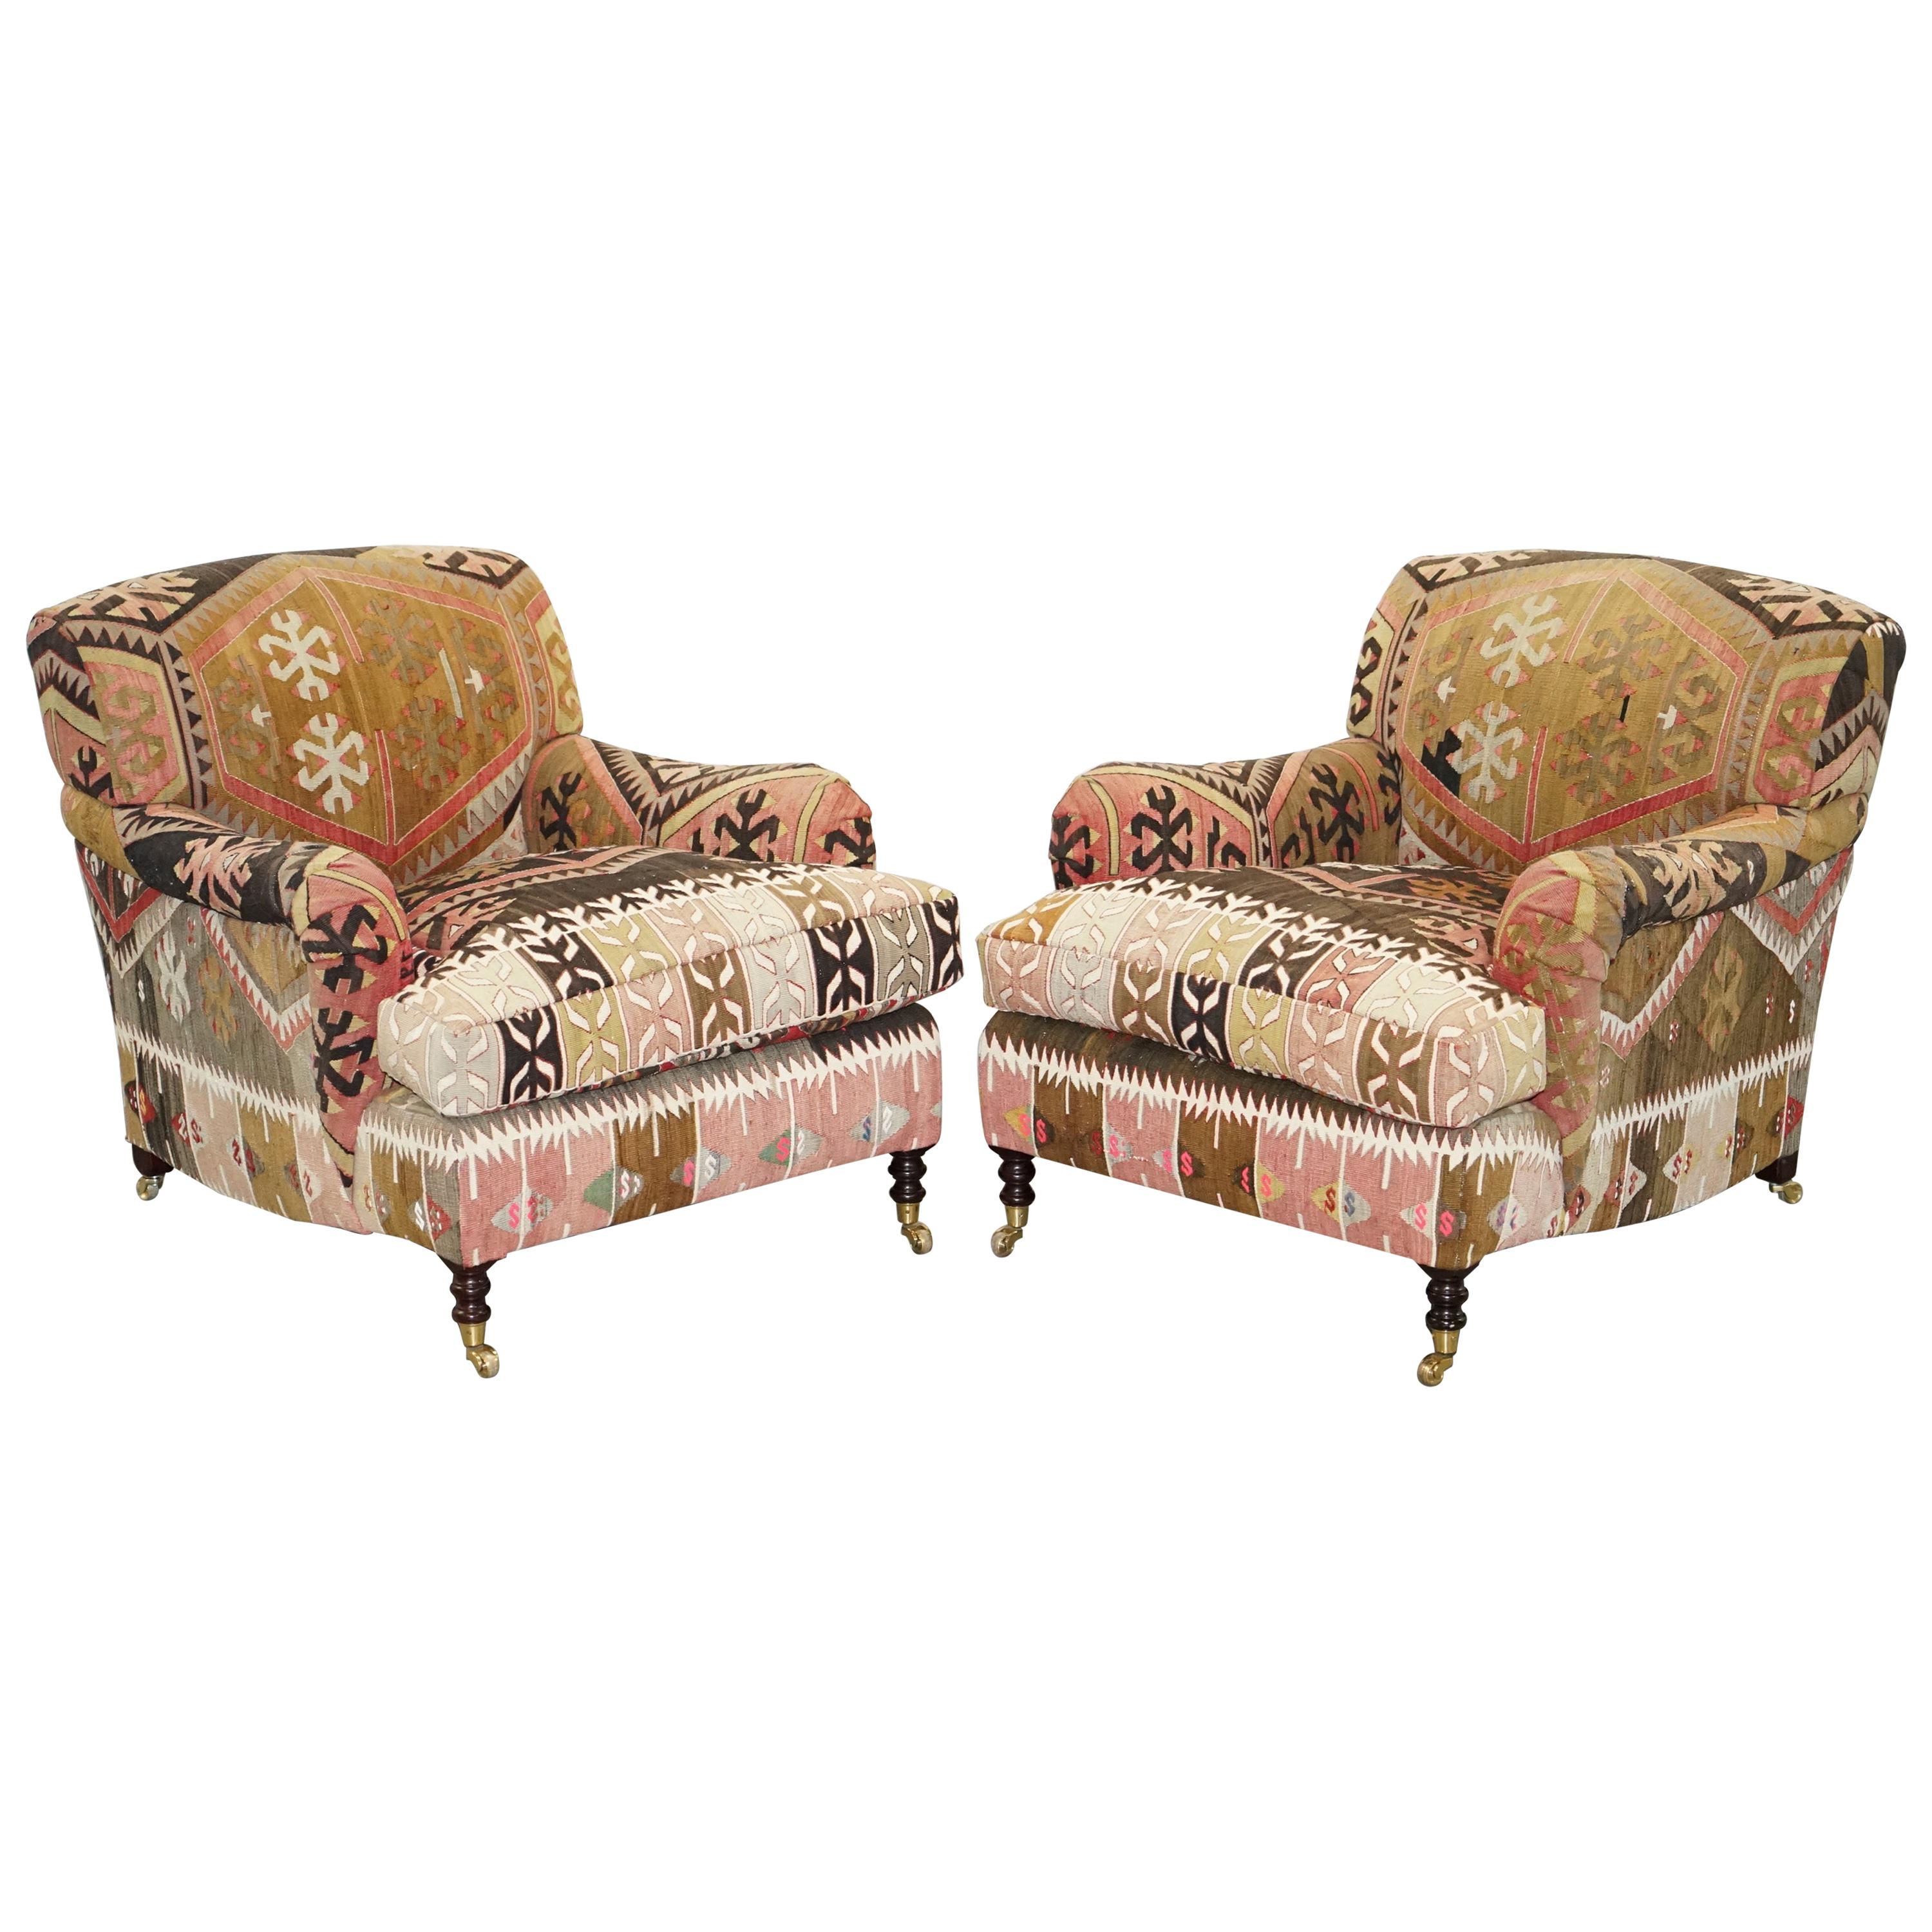 Pair of Very Large George Smith Signature Scroll Arm Kilim Aztec Armchairs